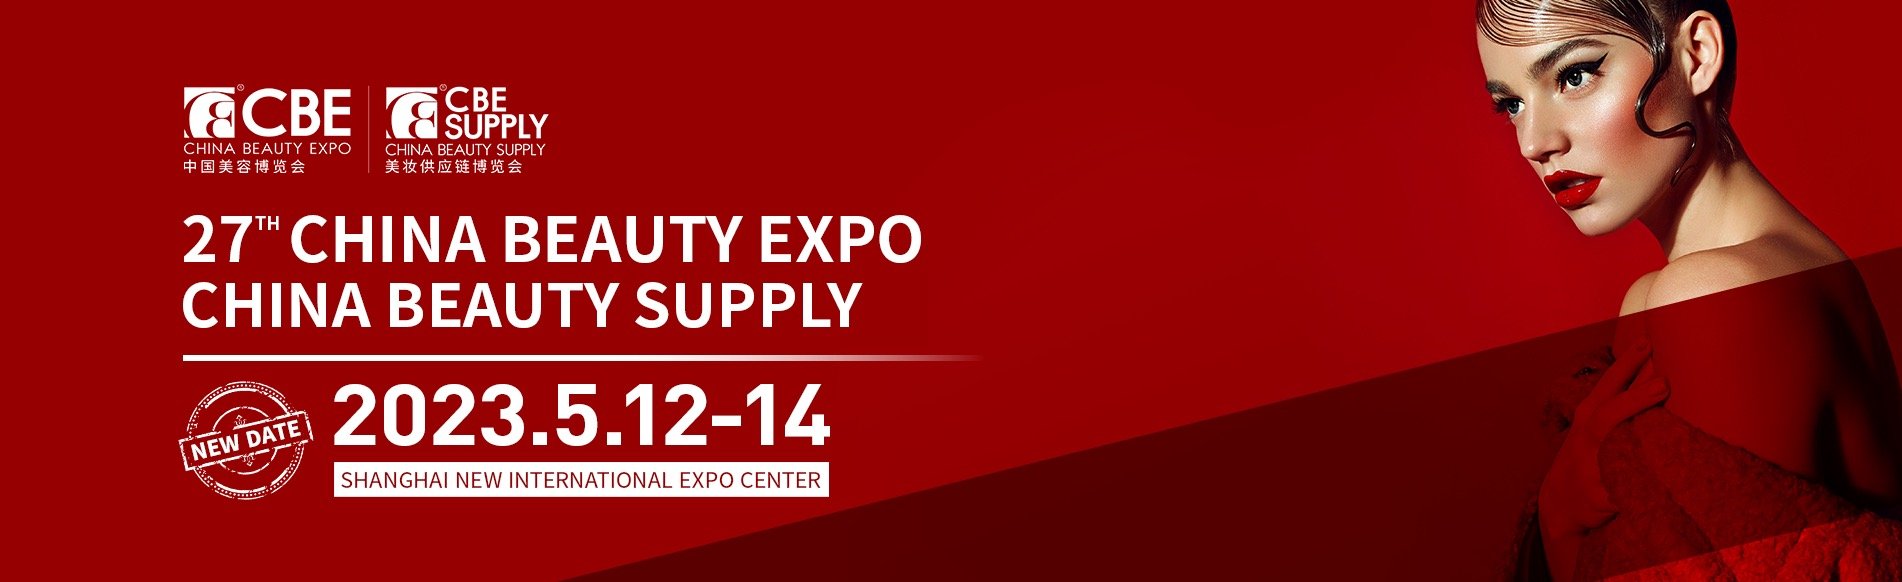 Attend the 27th China Beauty Expo